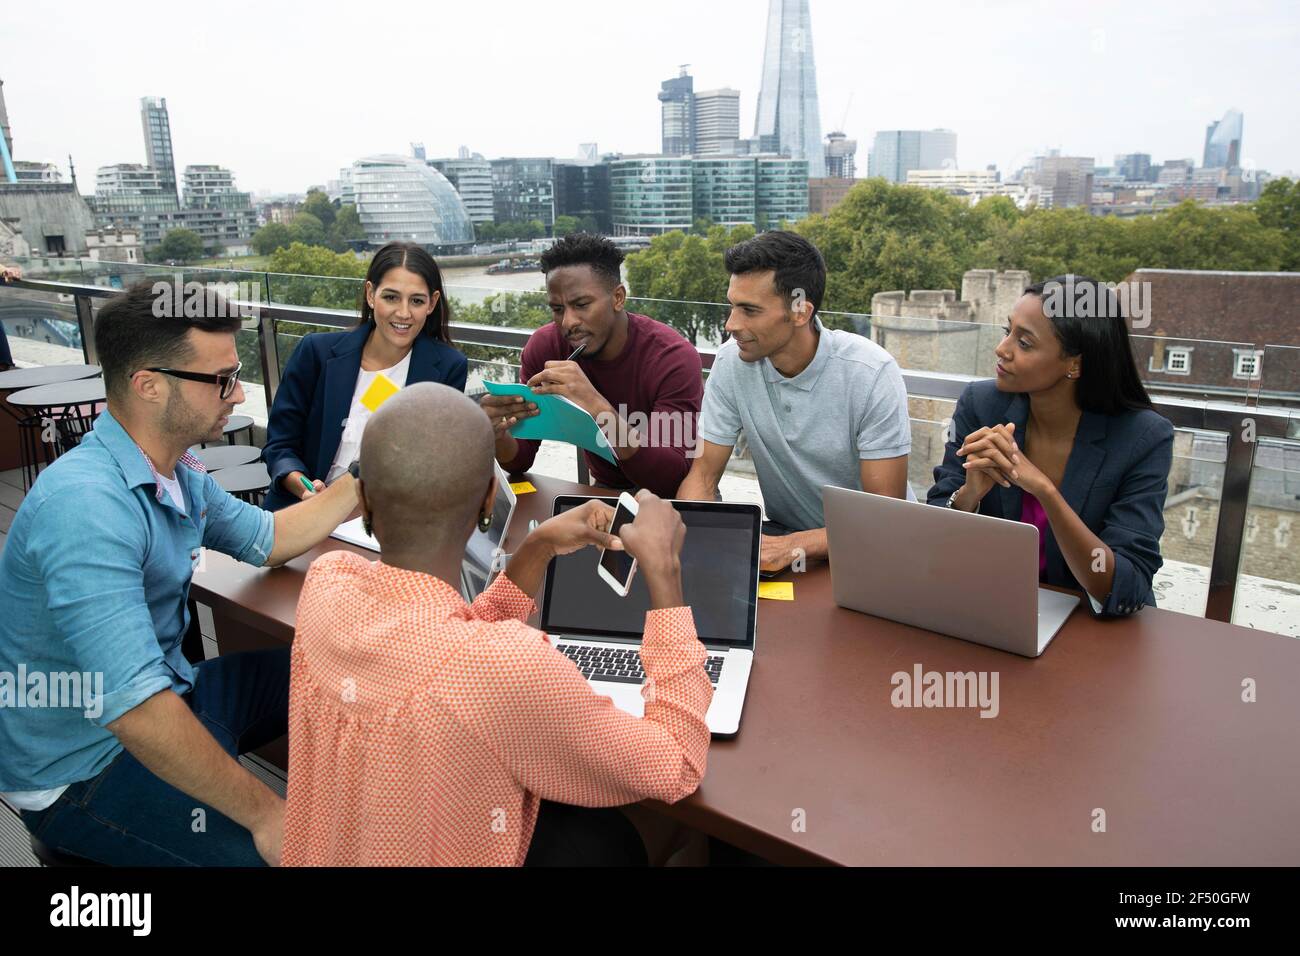 Diverse group of business people meeting on urban balcony, London, UK Stock Photo